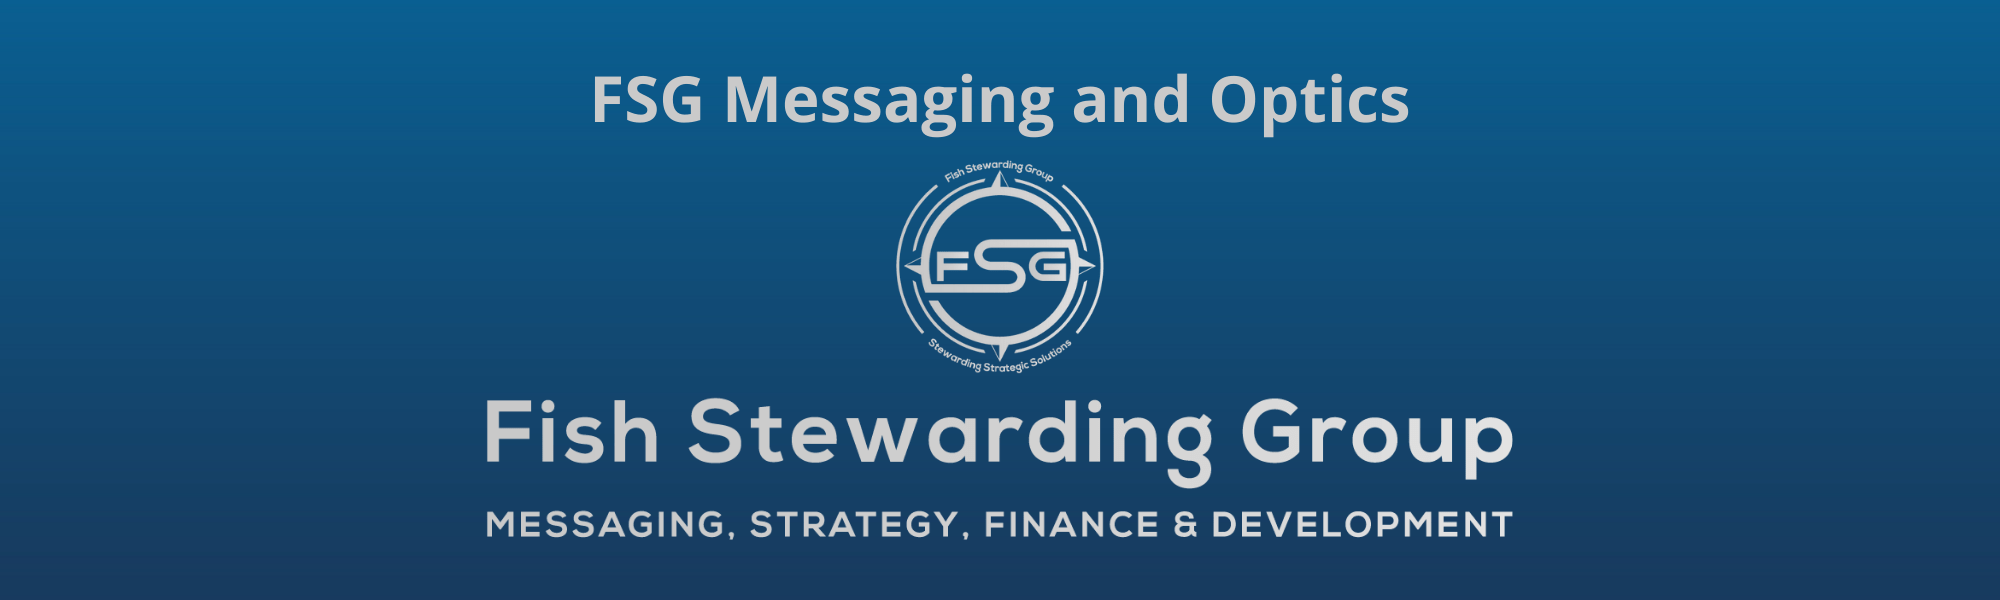 A thin rectangular Footer graphic for the FSG Messaging and Optics page. The background is a blue gradient color that goes from a dark blue on the bottom to a lighter blue on top. The text in gray on top reads FSG Messaging and Optics. The text in gray on the bottom center reads: Fish Stewarding Group and beneath that, the text reads Messaging, Strategy, Finance and Development. In the center above the text is the FSG logo in gray. The logo has the letters FSG in the middle with a circle with four pointed arrows facing north, south, east and west with the S connected to that circle. Four rounded lines make the next circle of the circle and the last layer is a thin circle with the text on the Bottom that reads Stewarding Strategist Solutions and on top, the text reads Fish Stewarding Group.